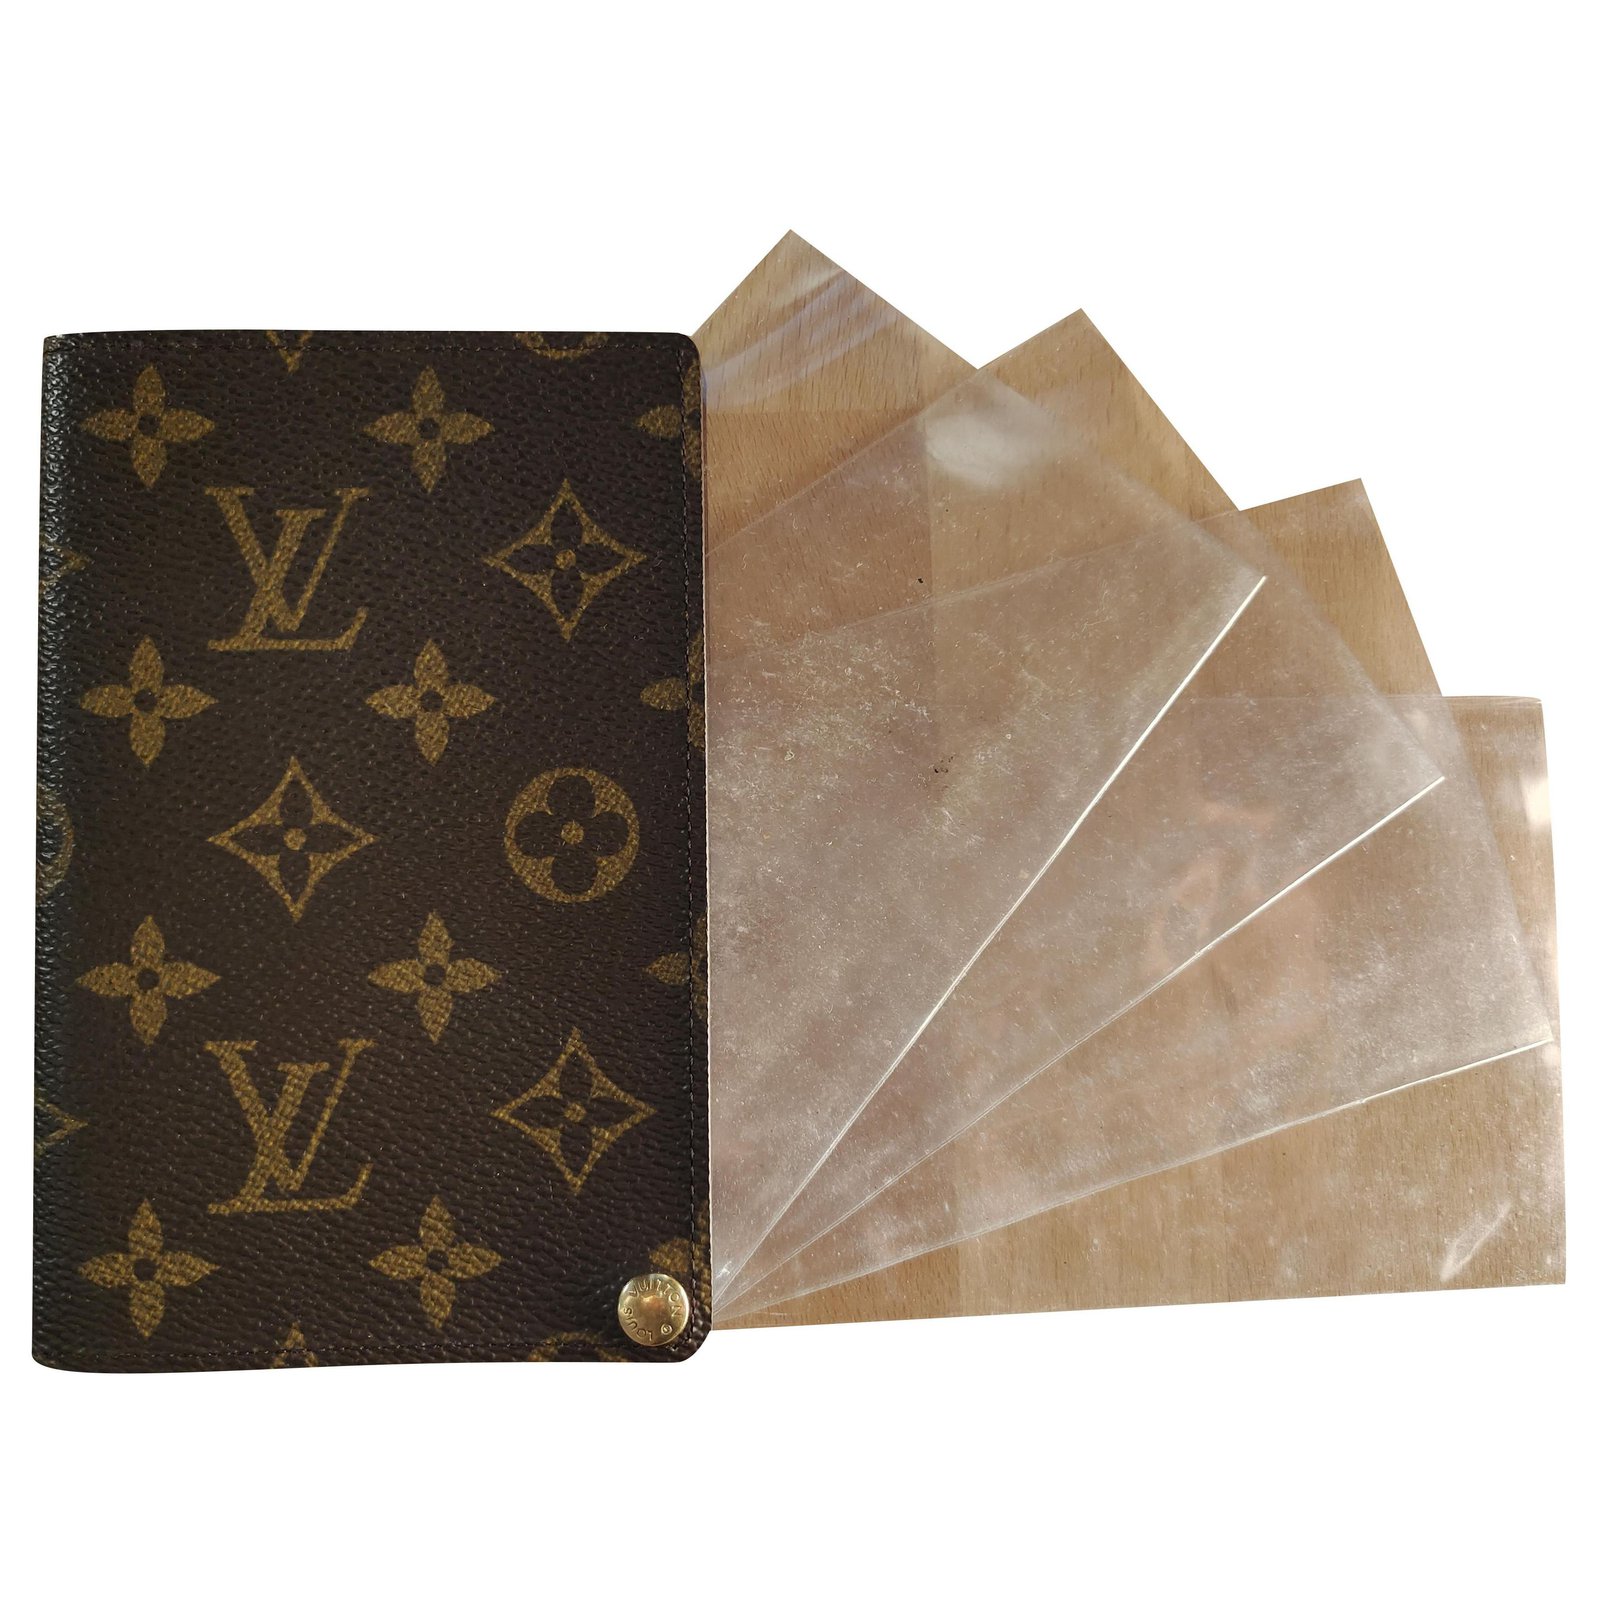 Louis Vuitton card holder with plastic sleeves